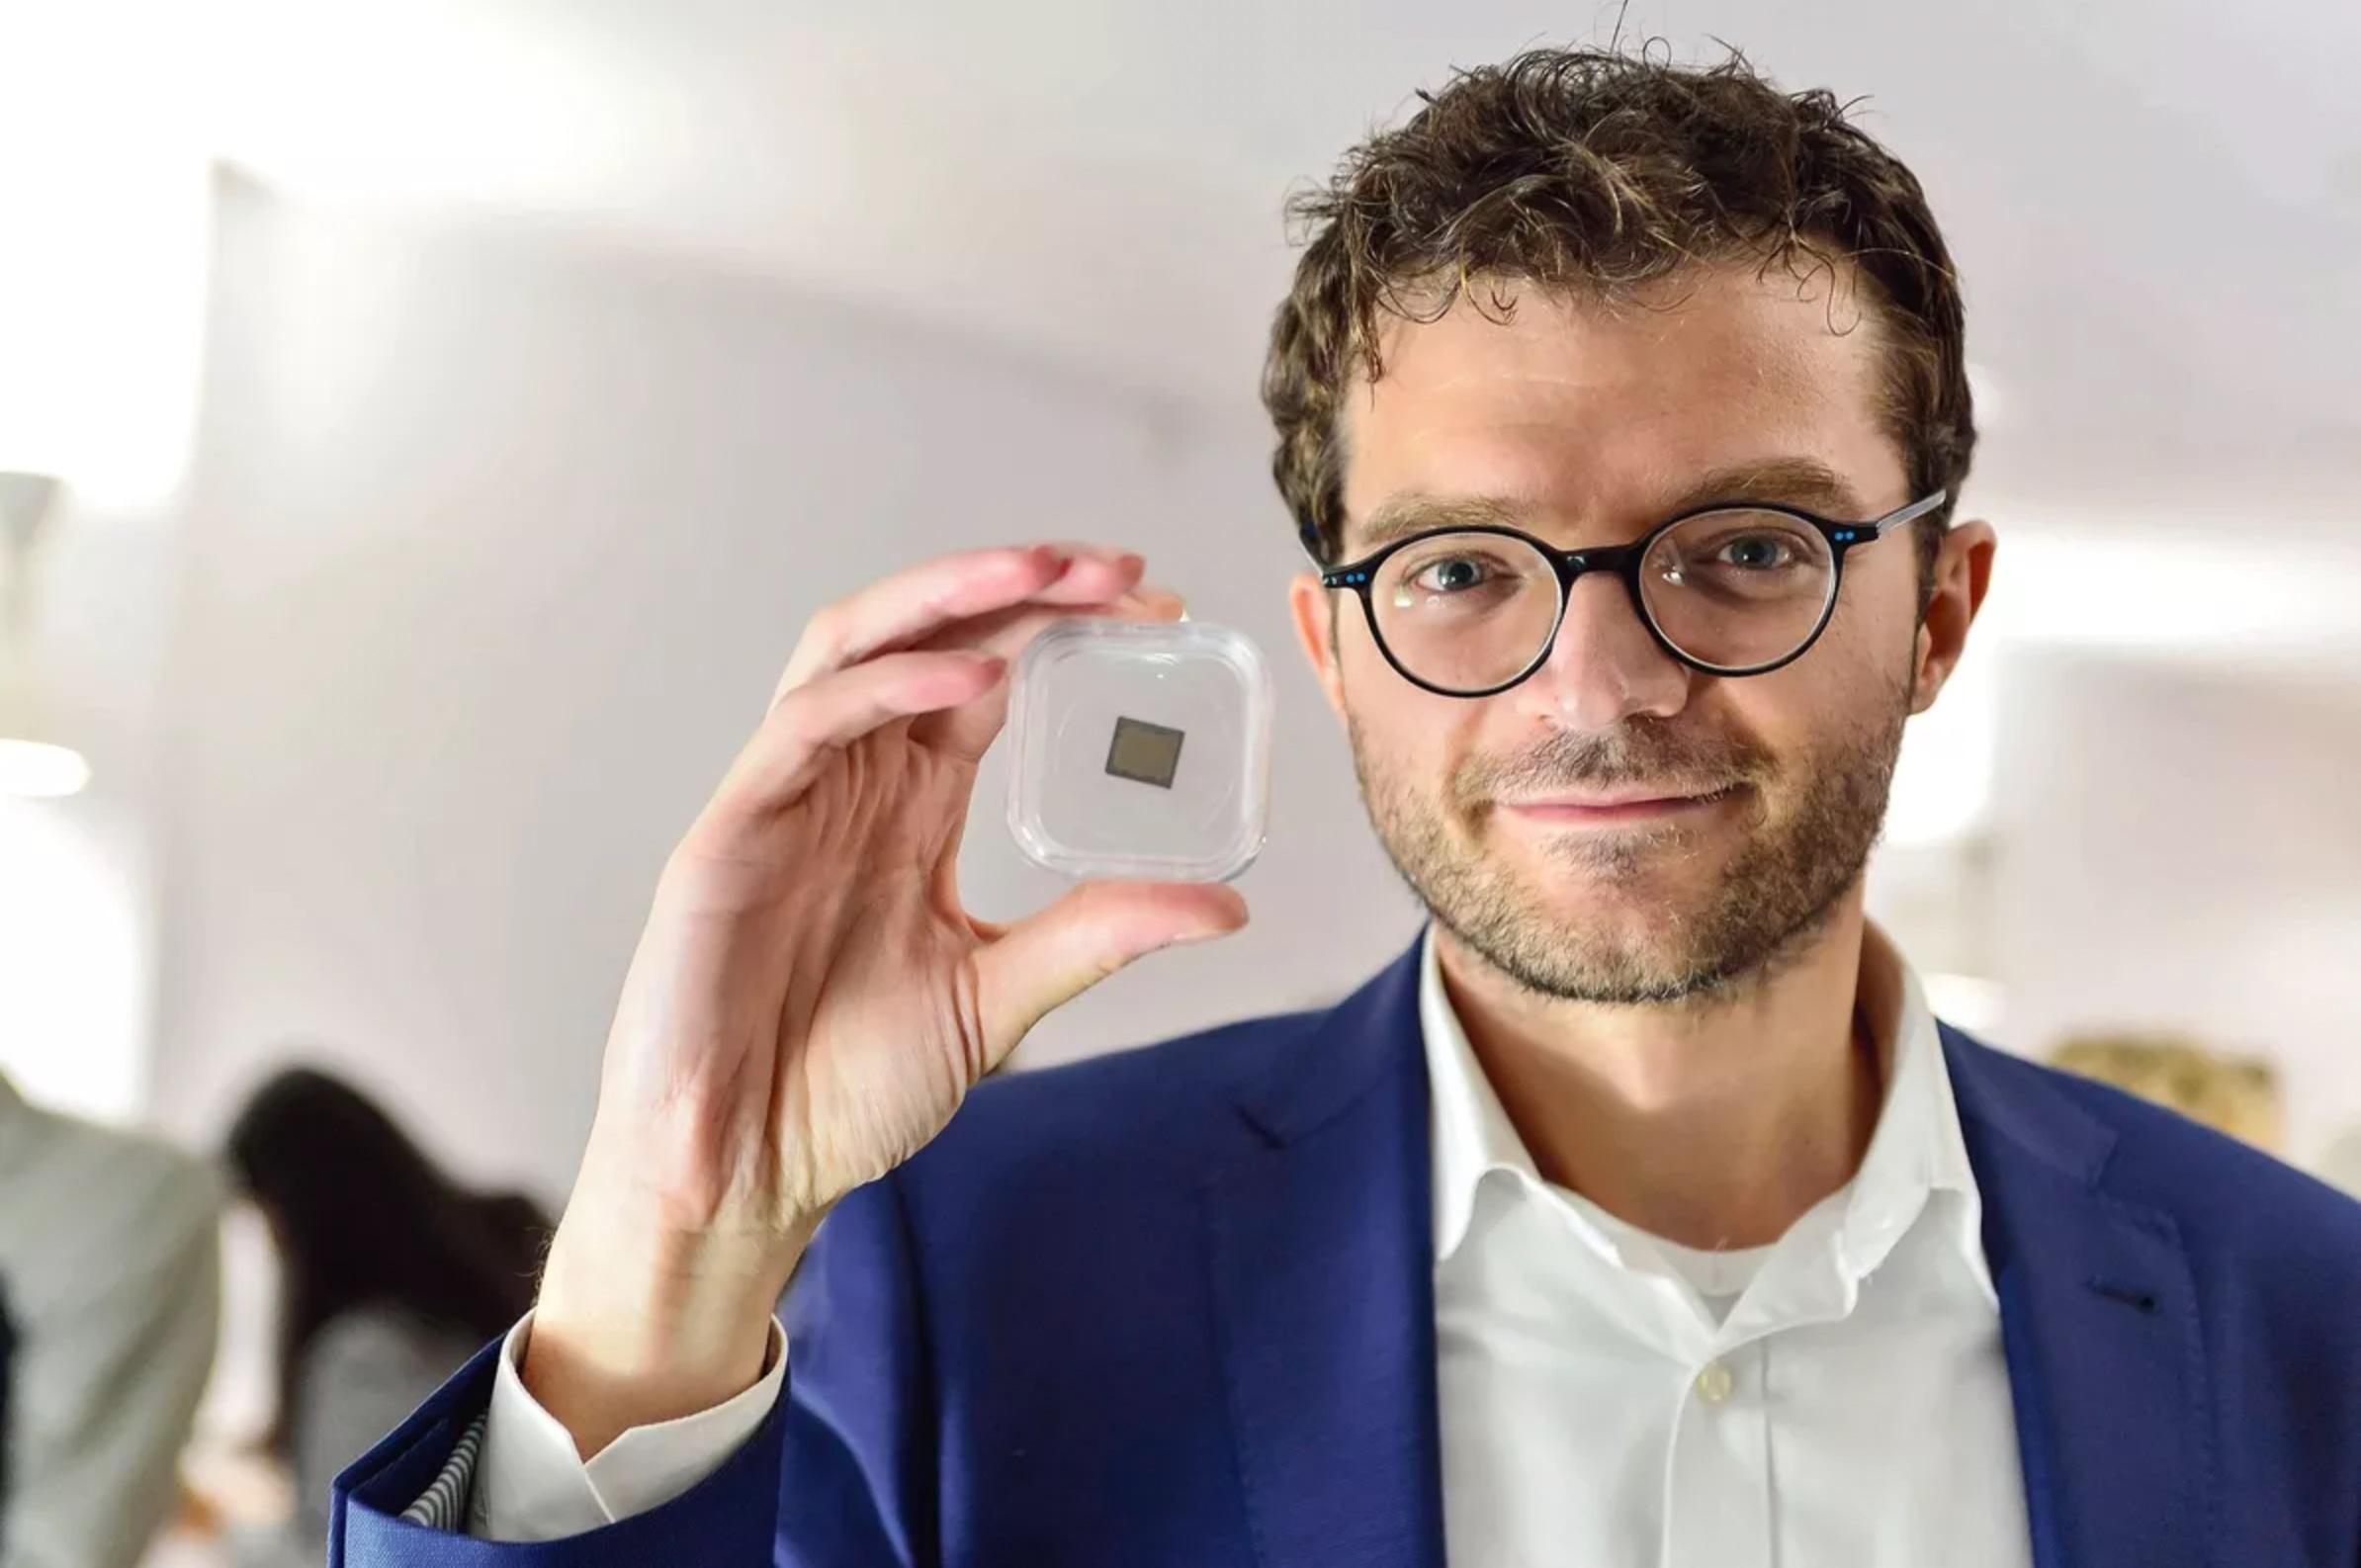 Invest Hong Kong announced today (December 12) that it has helped French semiconductor company Prophesee set up a regional headquarters in the city to push its neuromorphic artificial intelligence technology across Asia. Photo shows the Co-founder and CEO of Prophesee, Mr Luca Verre. 


